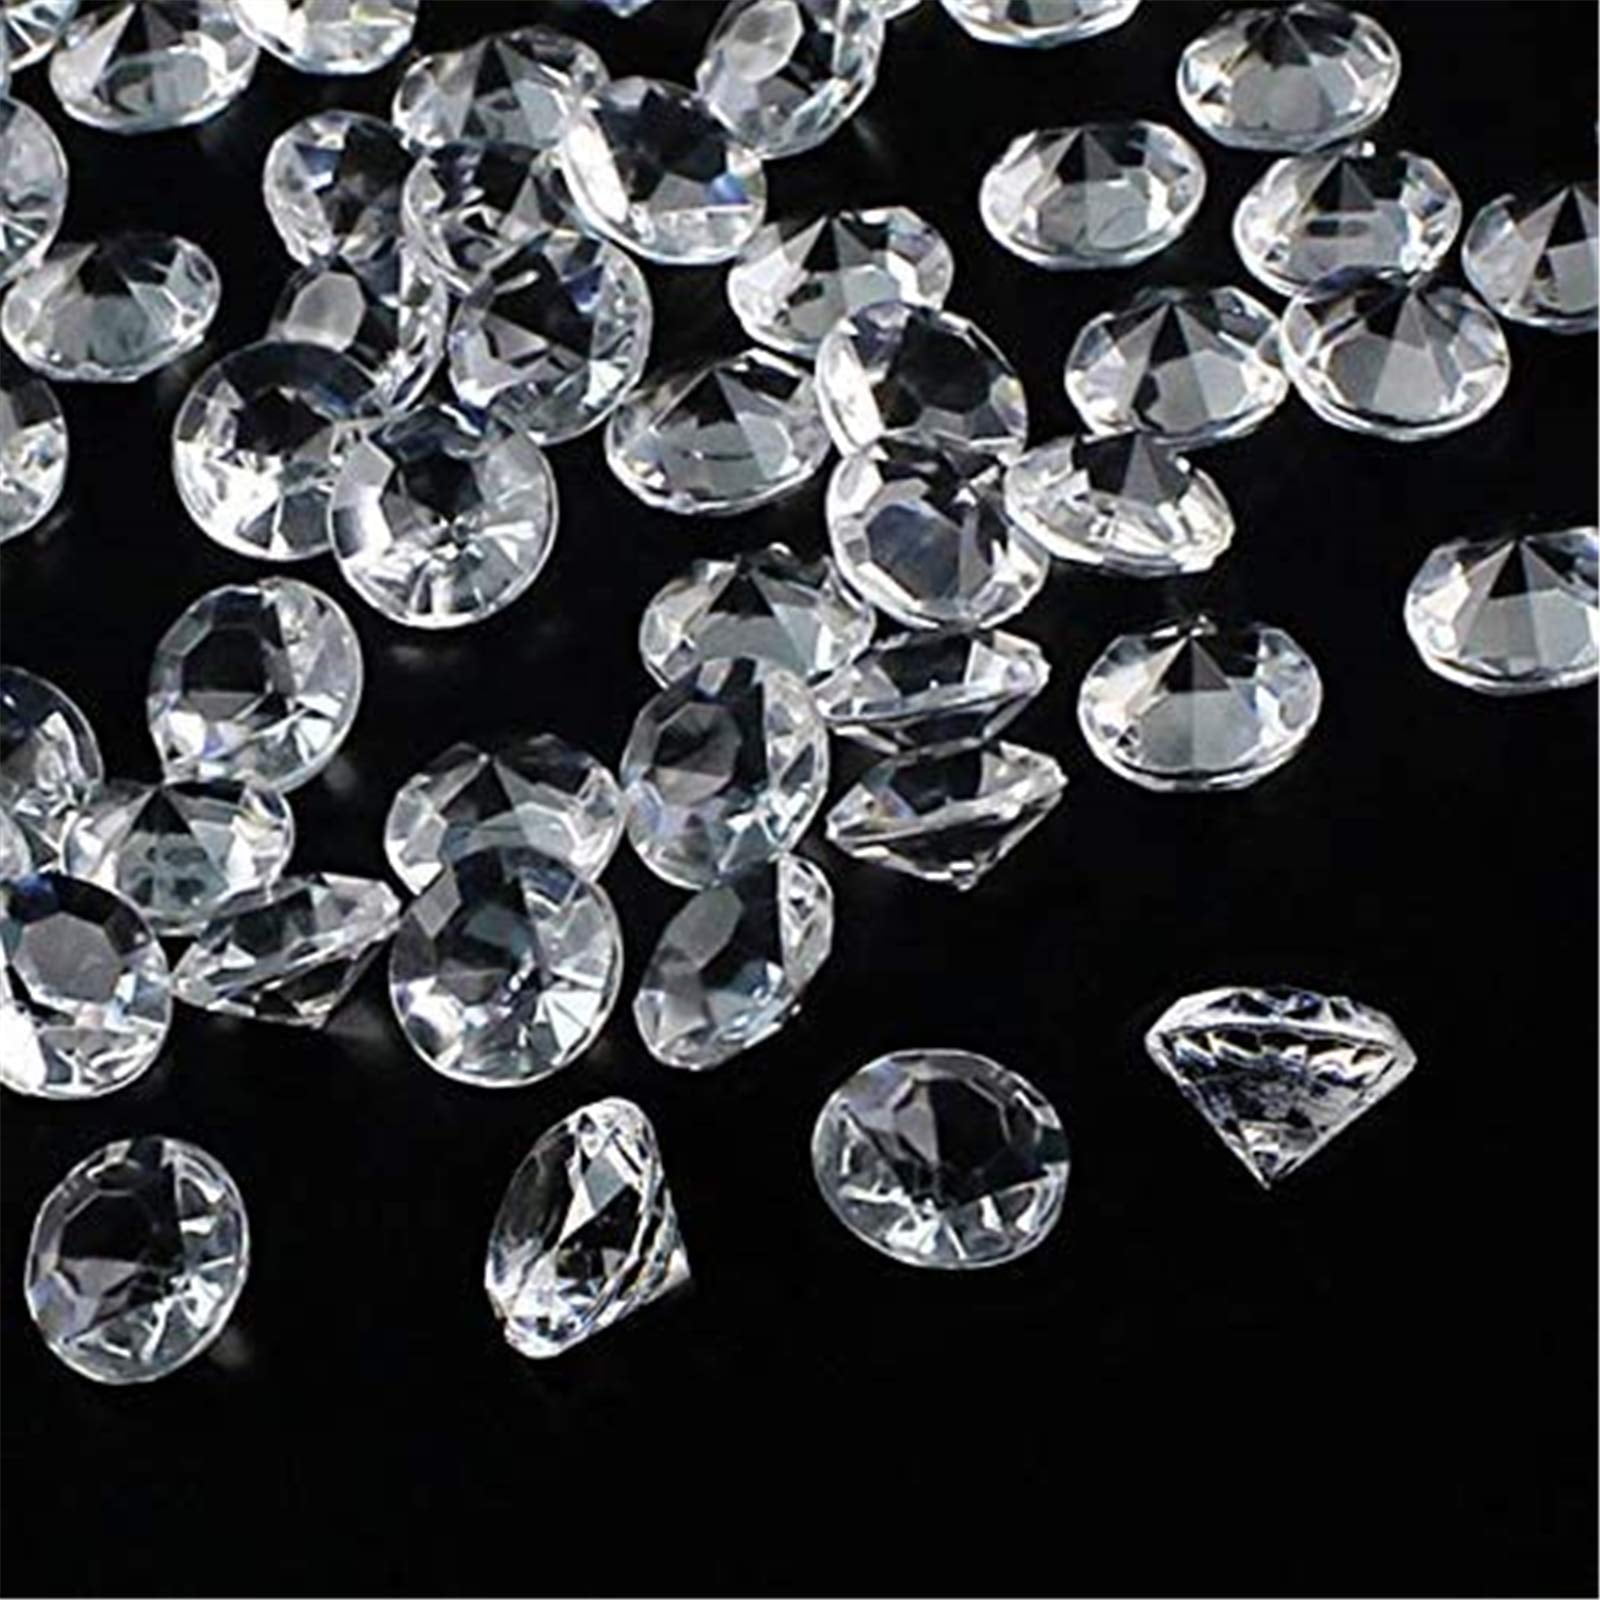 OUTUXED 300pcs 20mm Clear Wedding Table Scattering Crystals Acrylic Diamonds Gemstones Wedding Bridal Shower Party Decorations Vase Fillers with 1 Large Velvet Pouch 1.5 LB